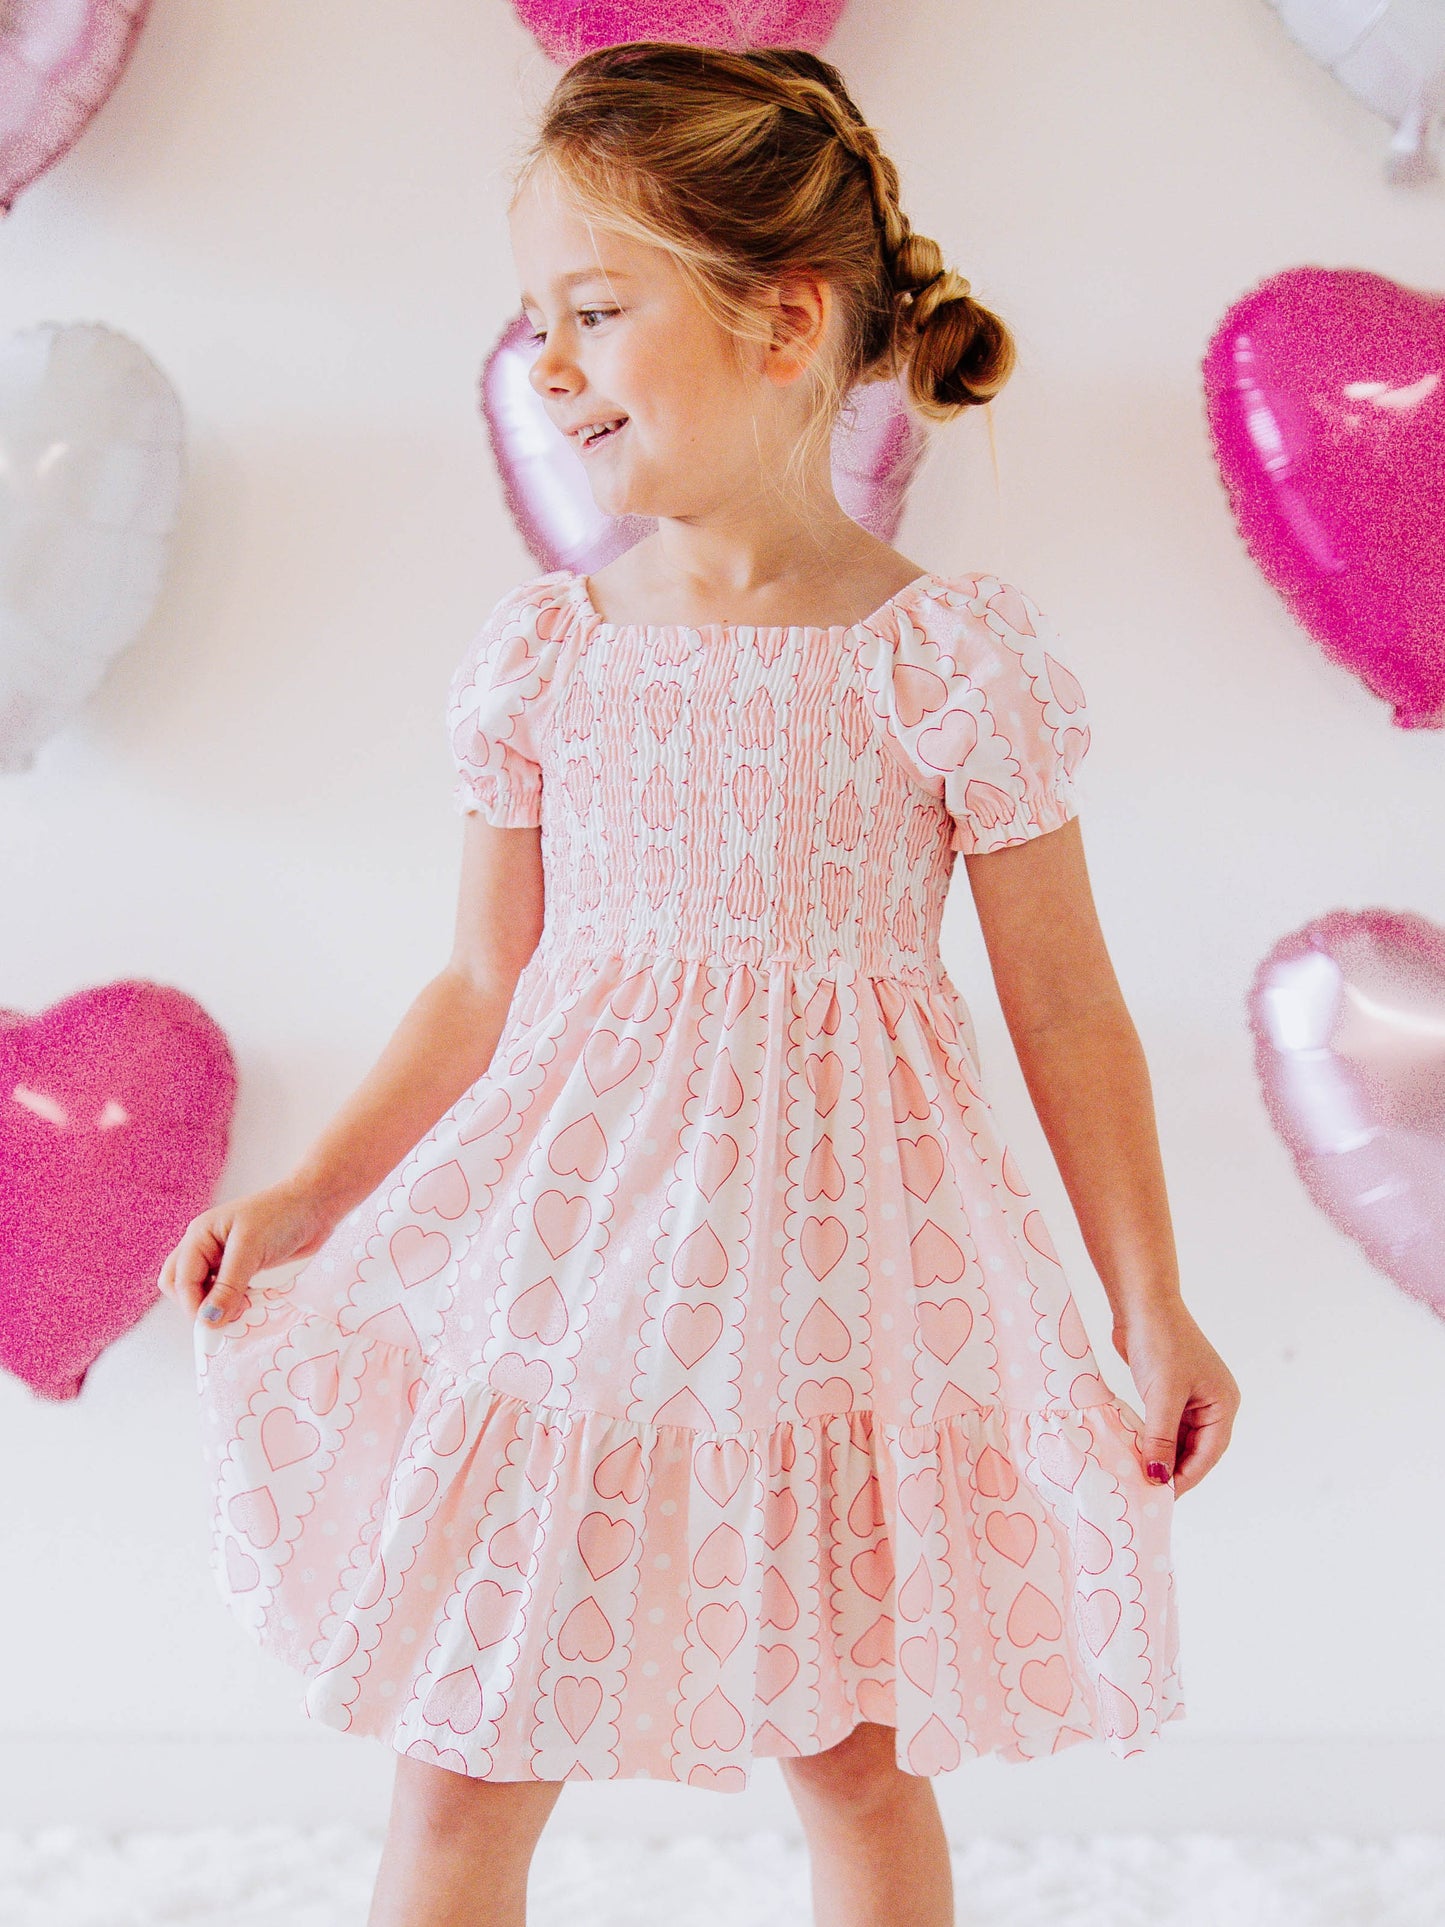 Puff Sleeved Dress - Mirrored Hearts